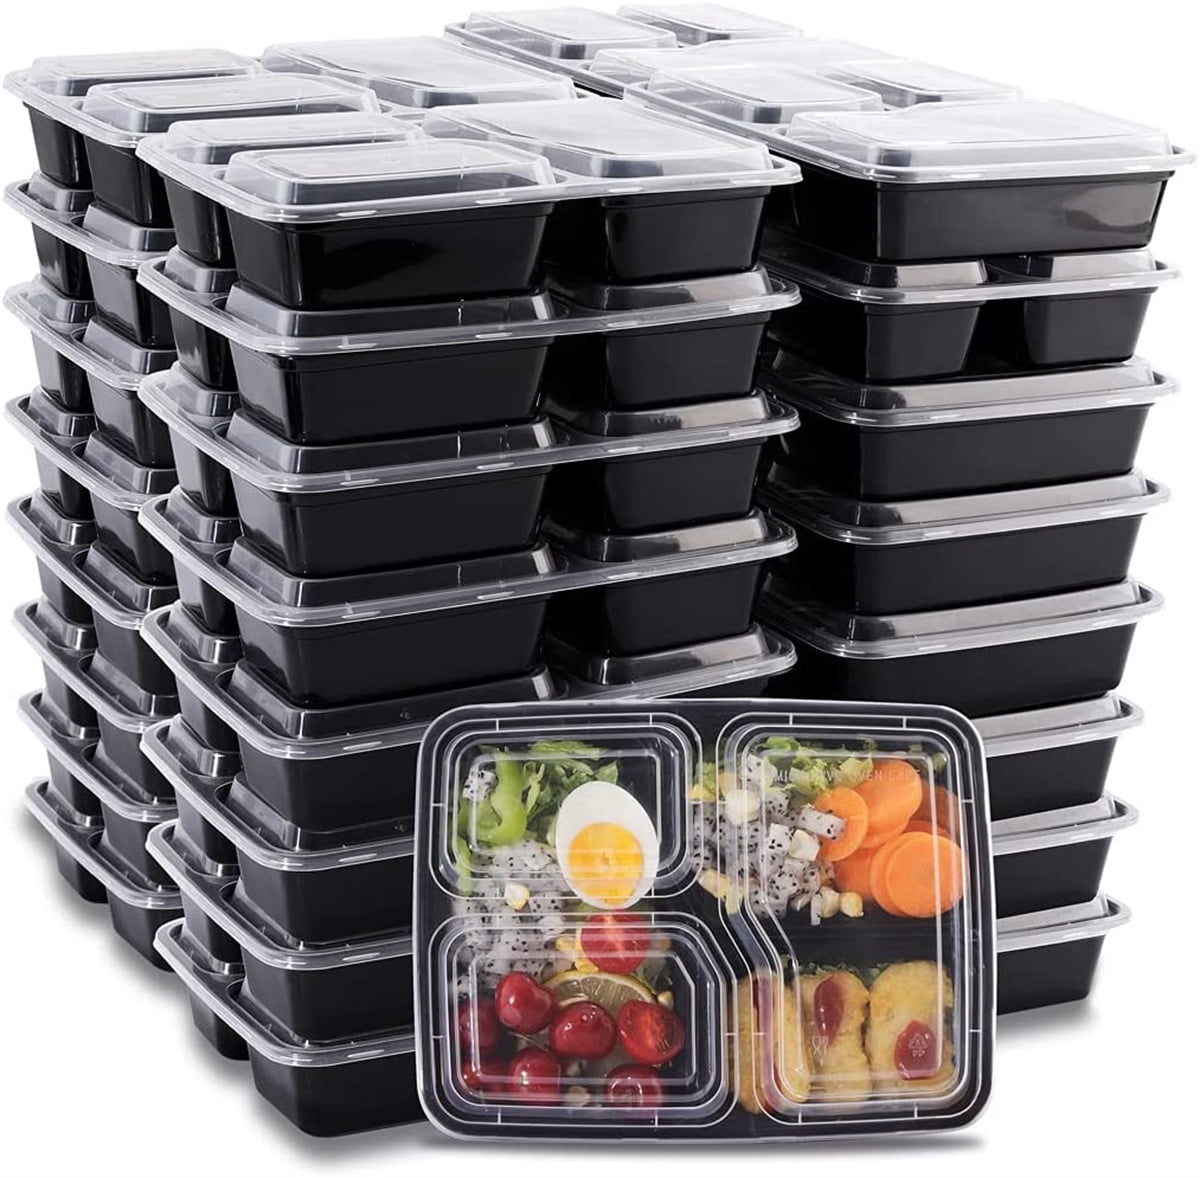 Kitch’nMore 38oz Meal Prep Containers, Extra Large &Thick Food Storage Containers with Lids, Reusable Plastic,Disposable Bento Box,Stackable